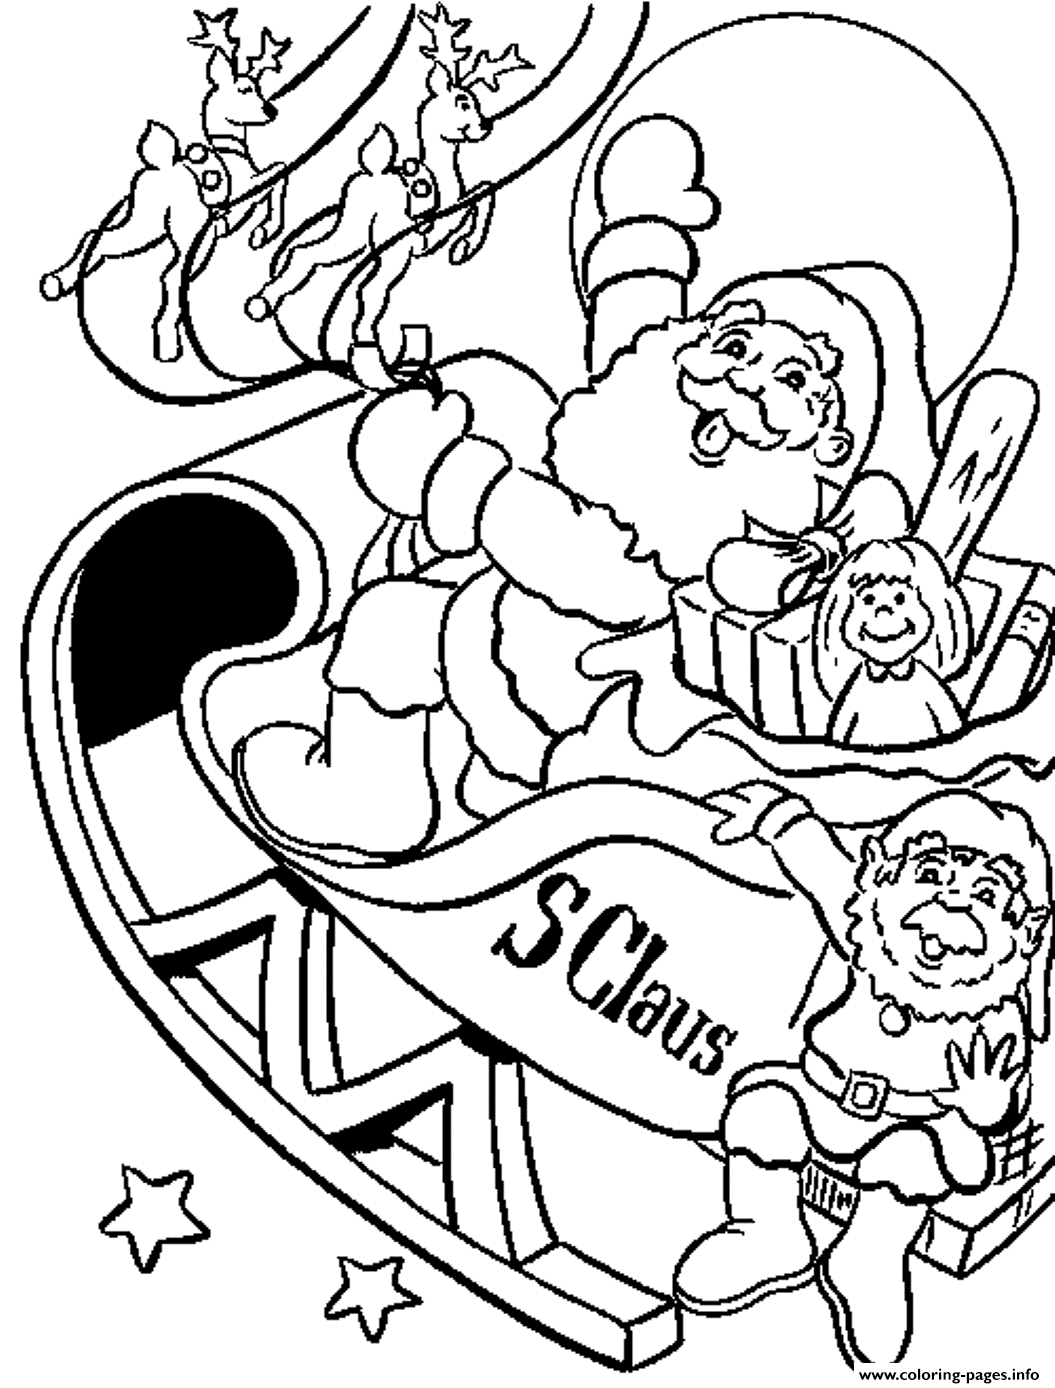 Coloring Pages Of Santa Claus Flying With His Sleigh8c31 ...